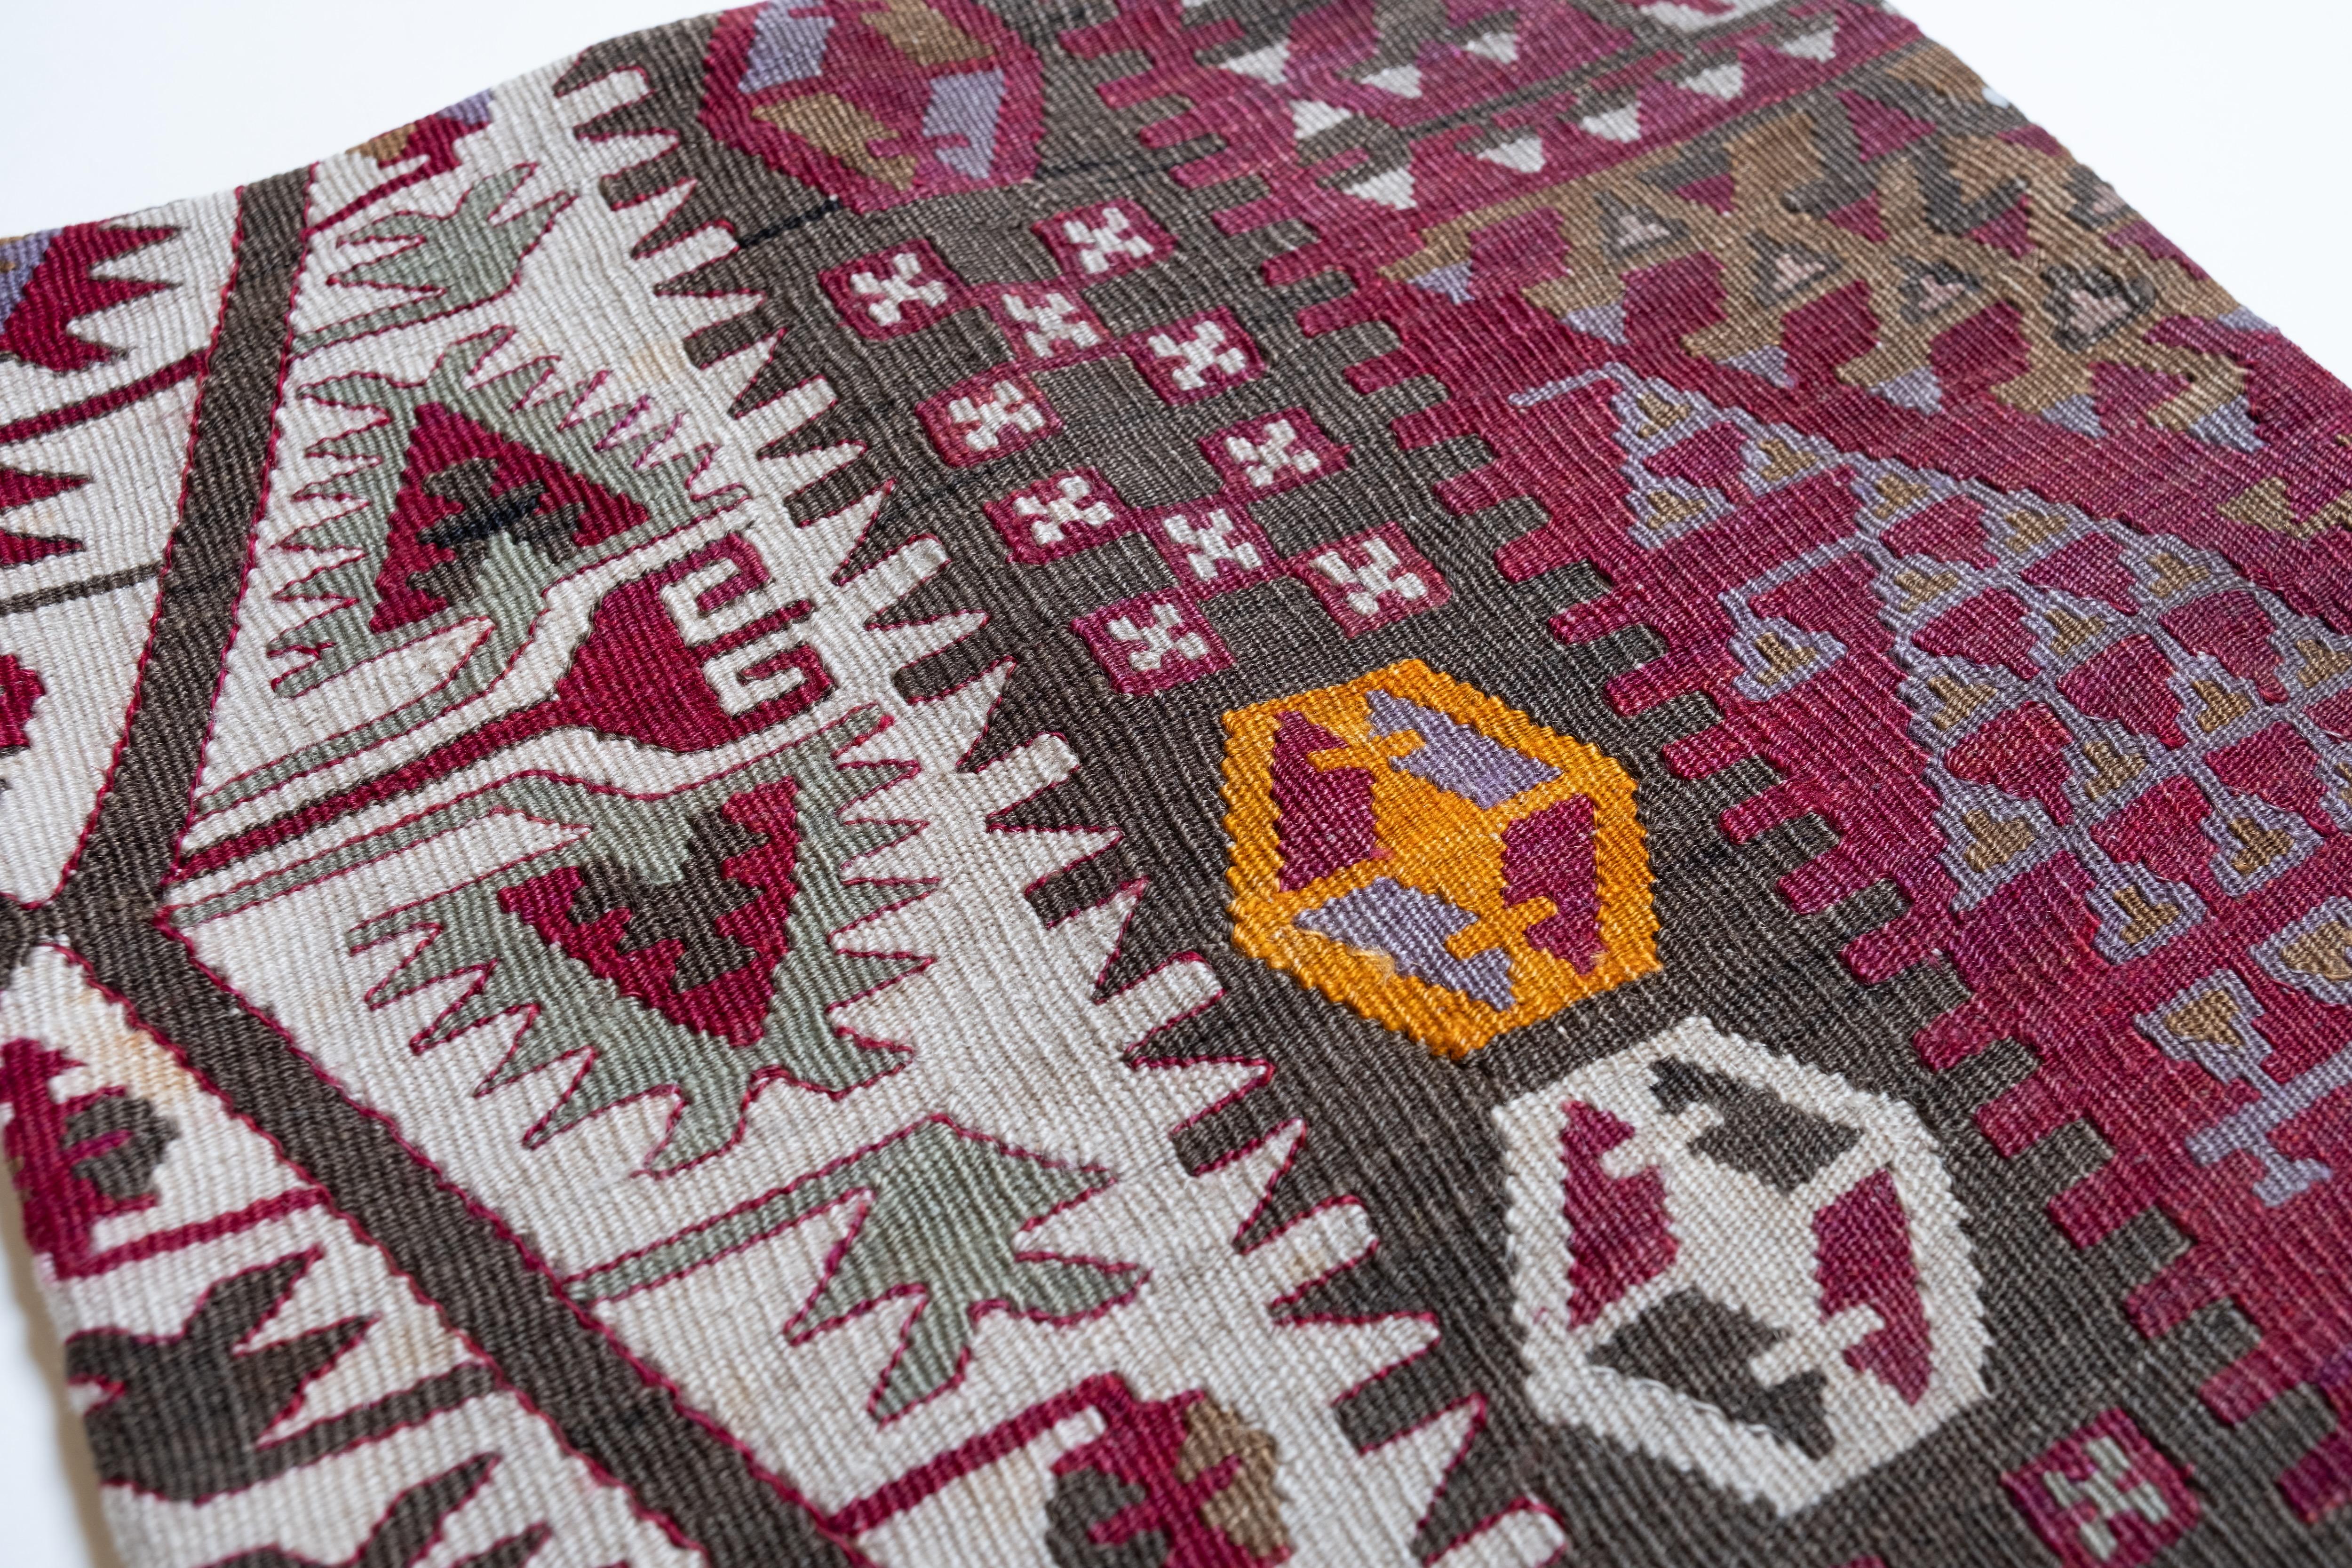 Hand-Knotted Vintage & Old Kilim Cushion Cover, Anatolian Yastik Turkish Modern Pillow 4499 For Sale